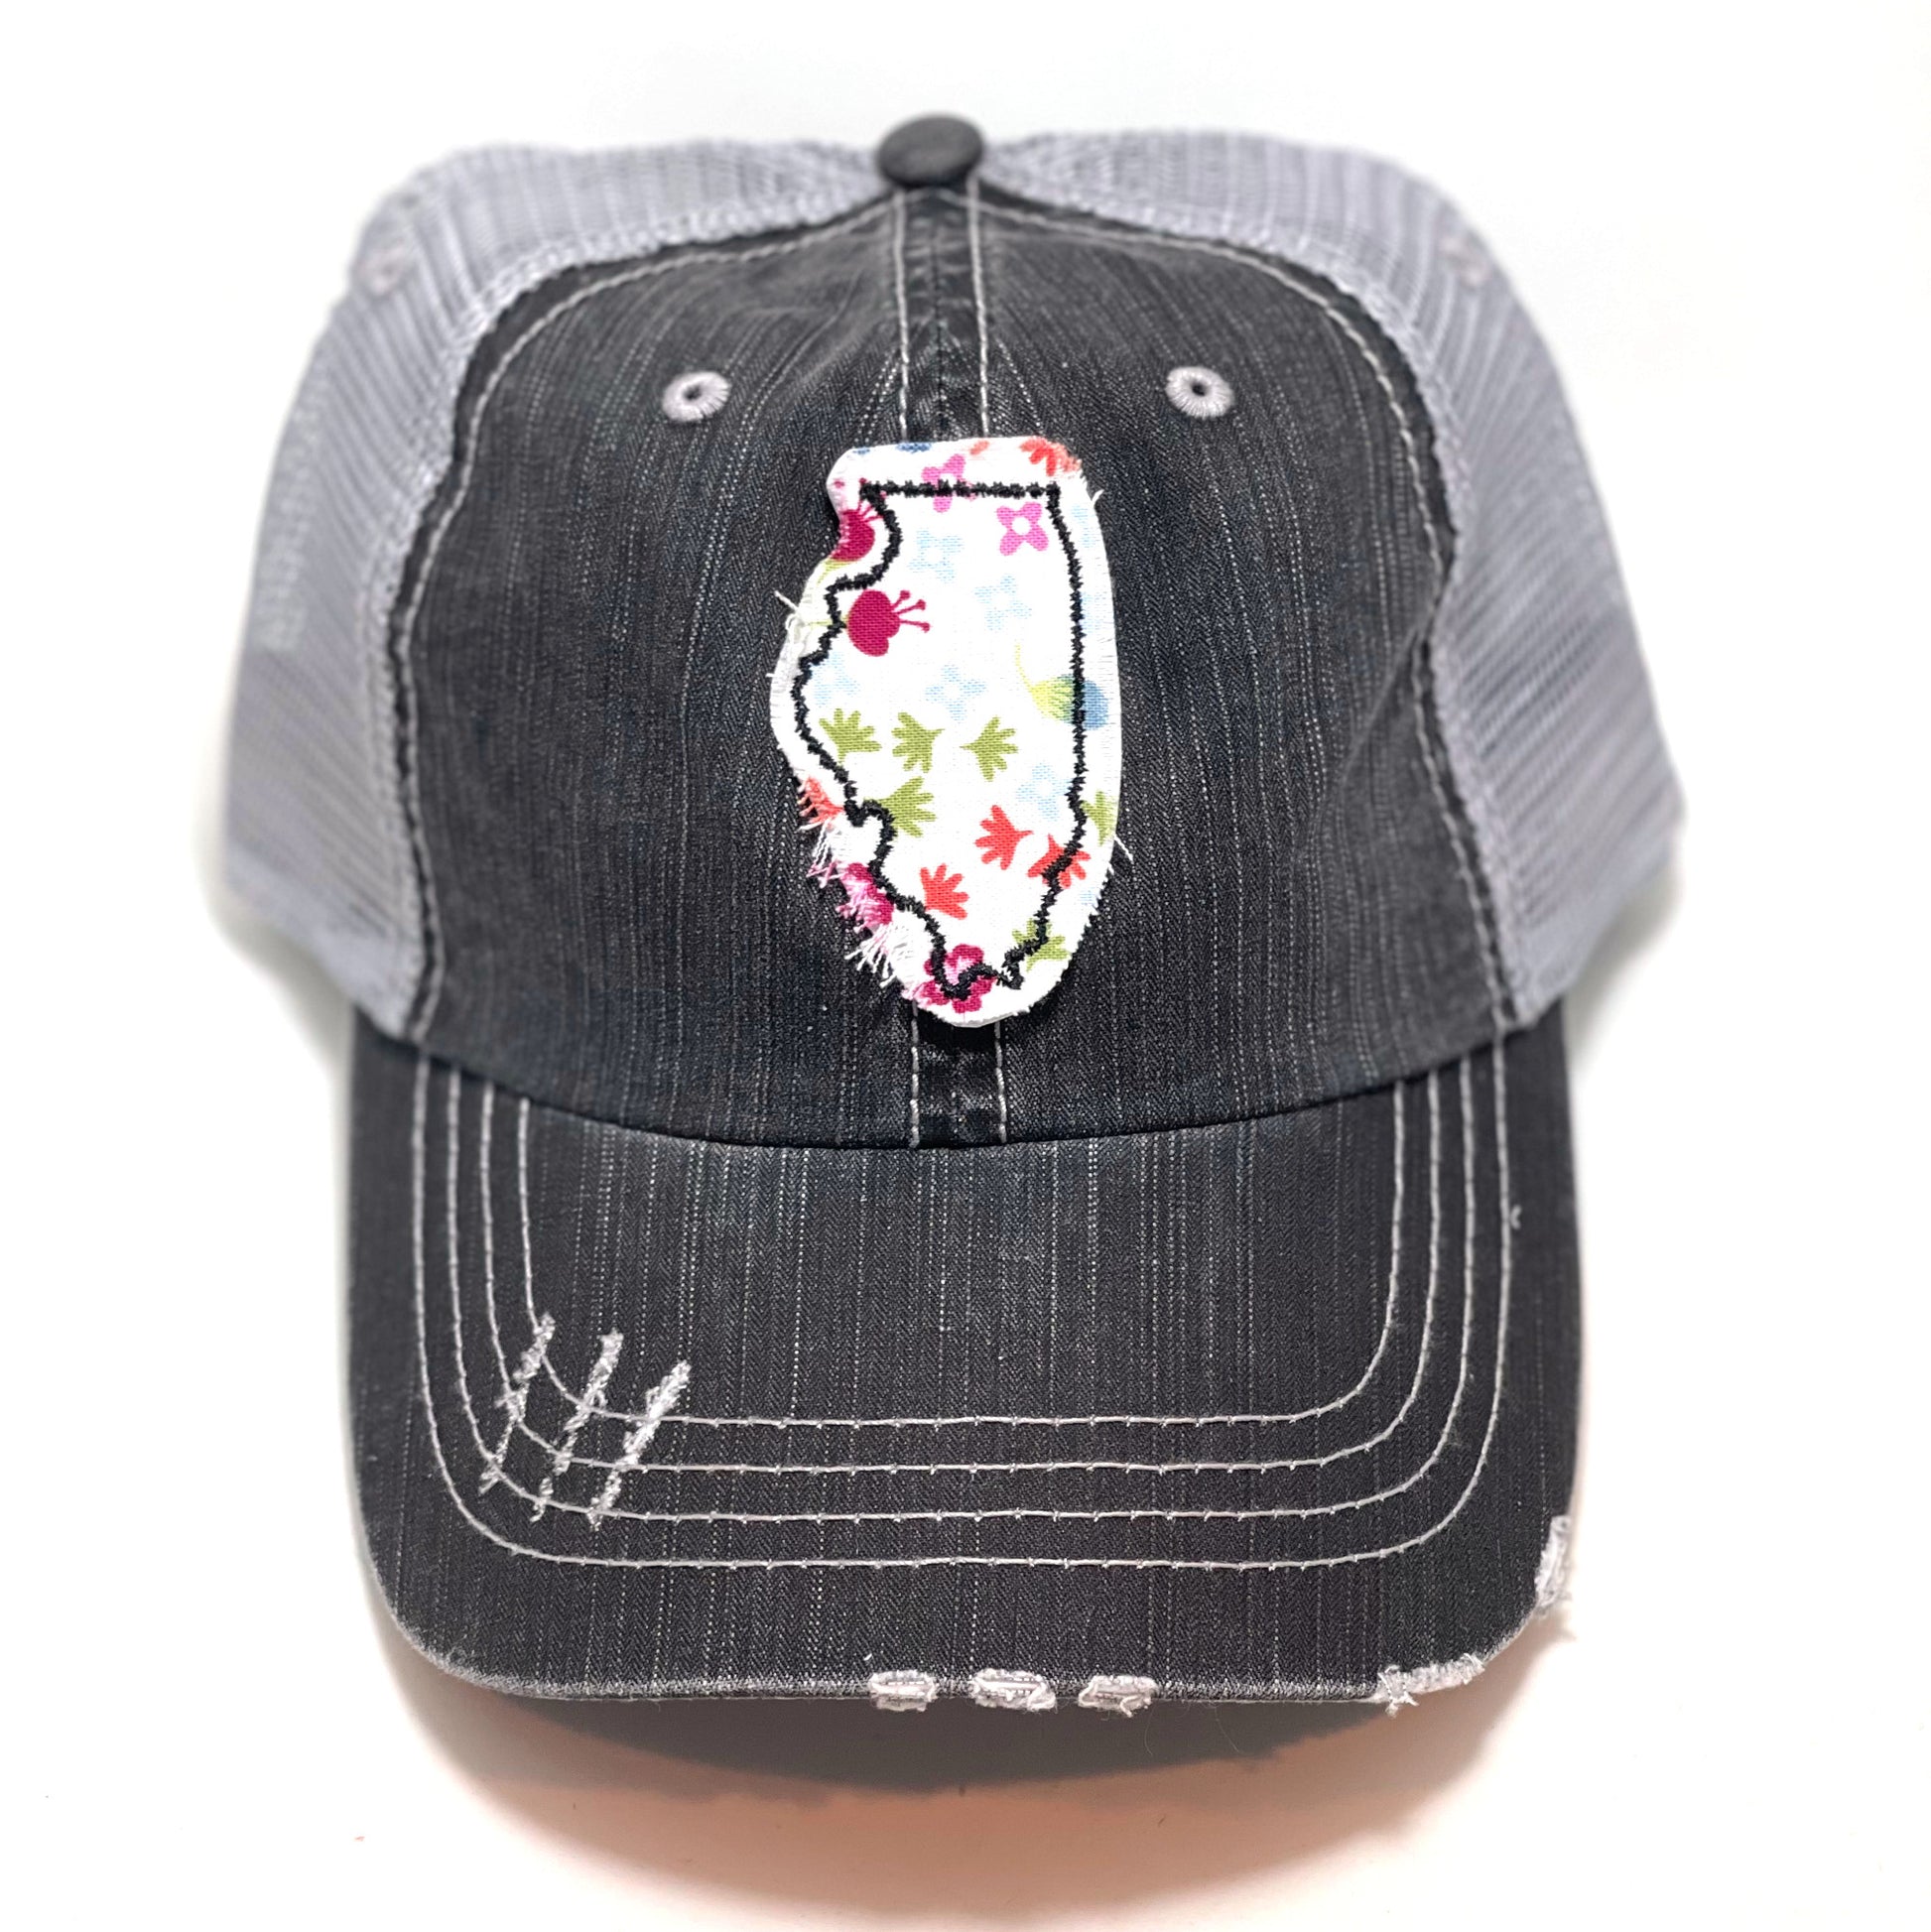 gray distressed trucker hat with gray floral fabric state of Illinois